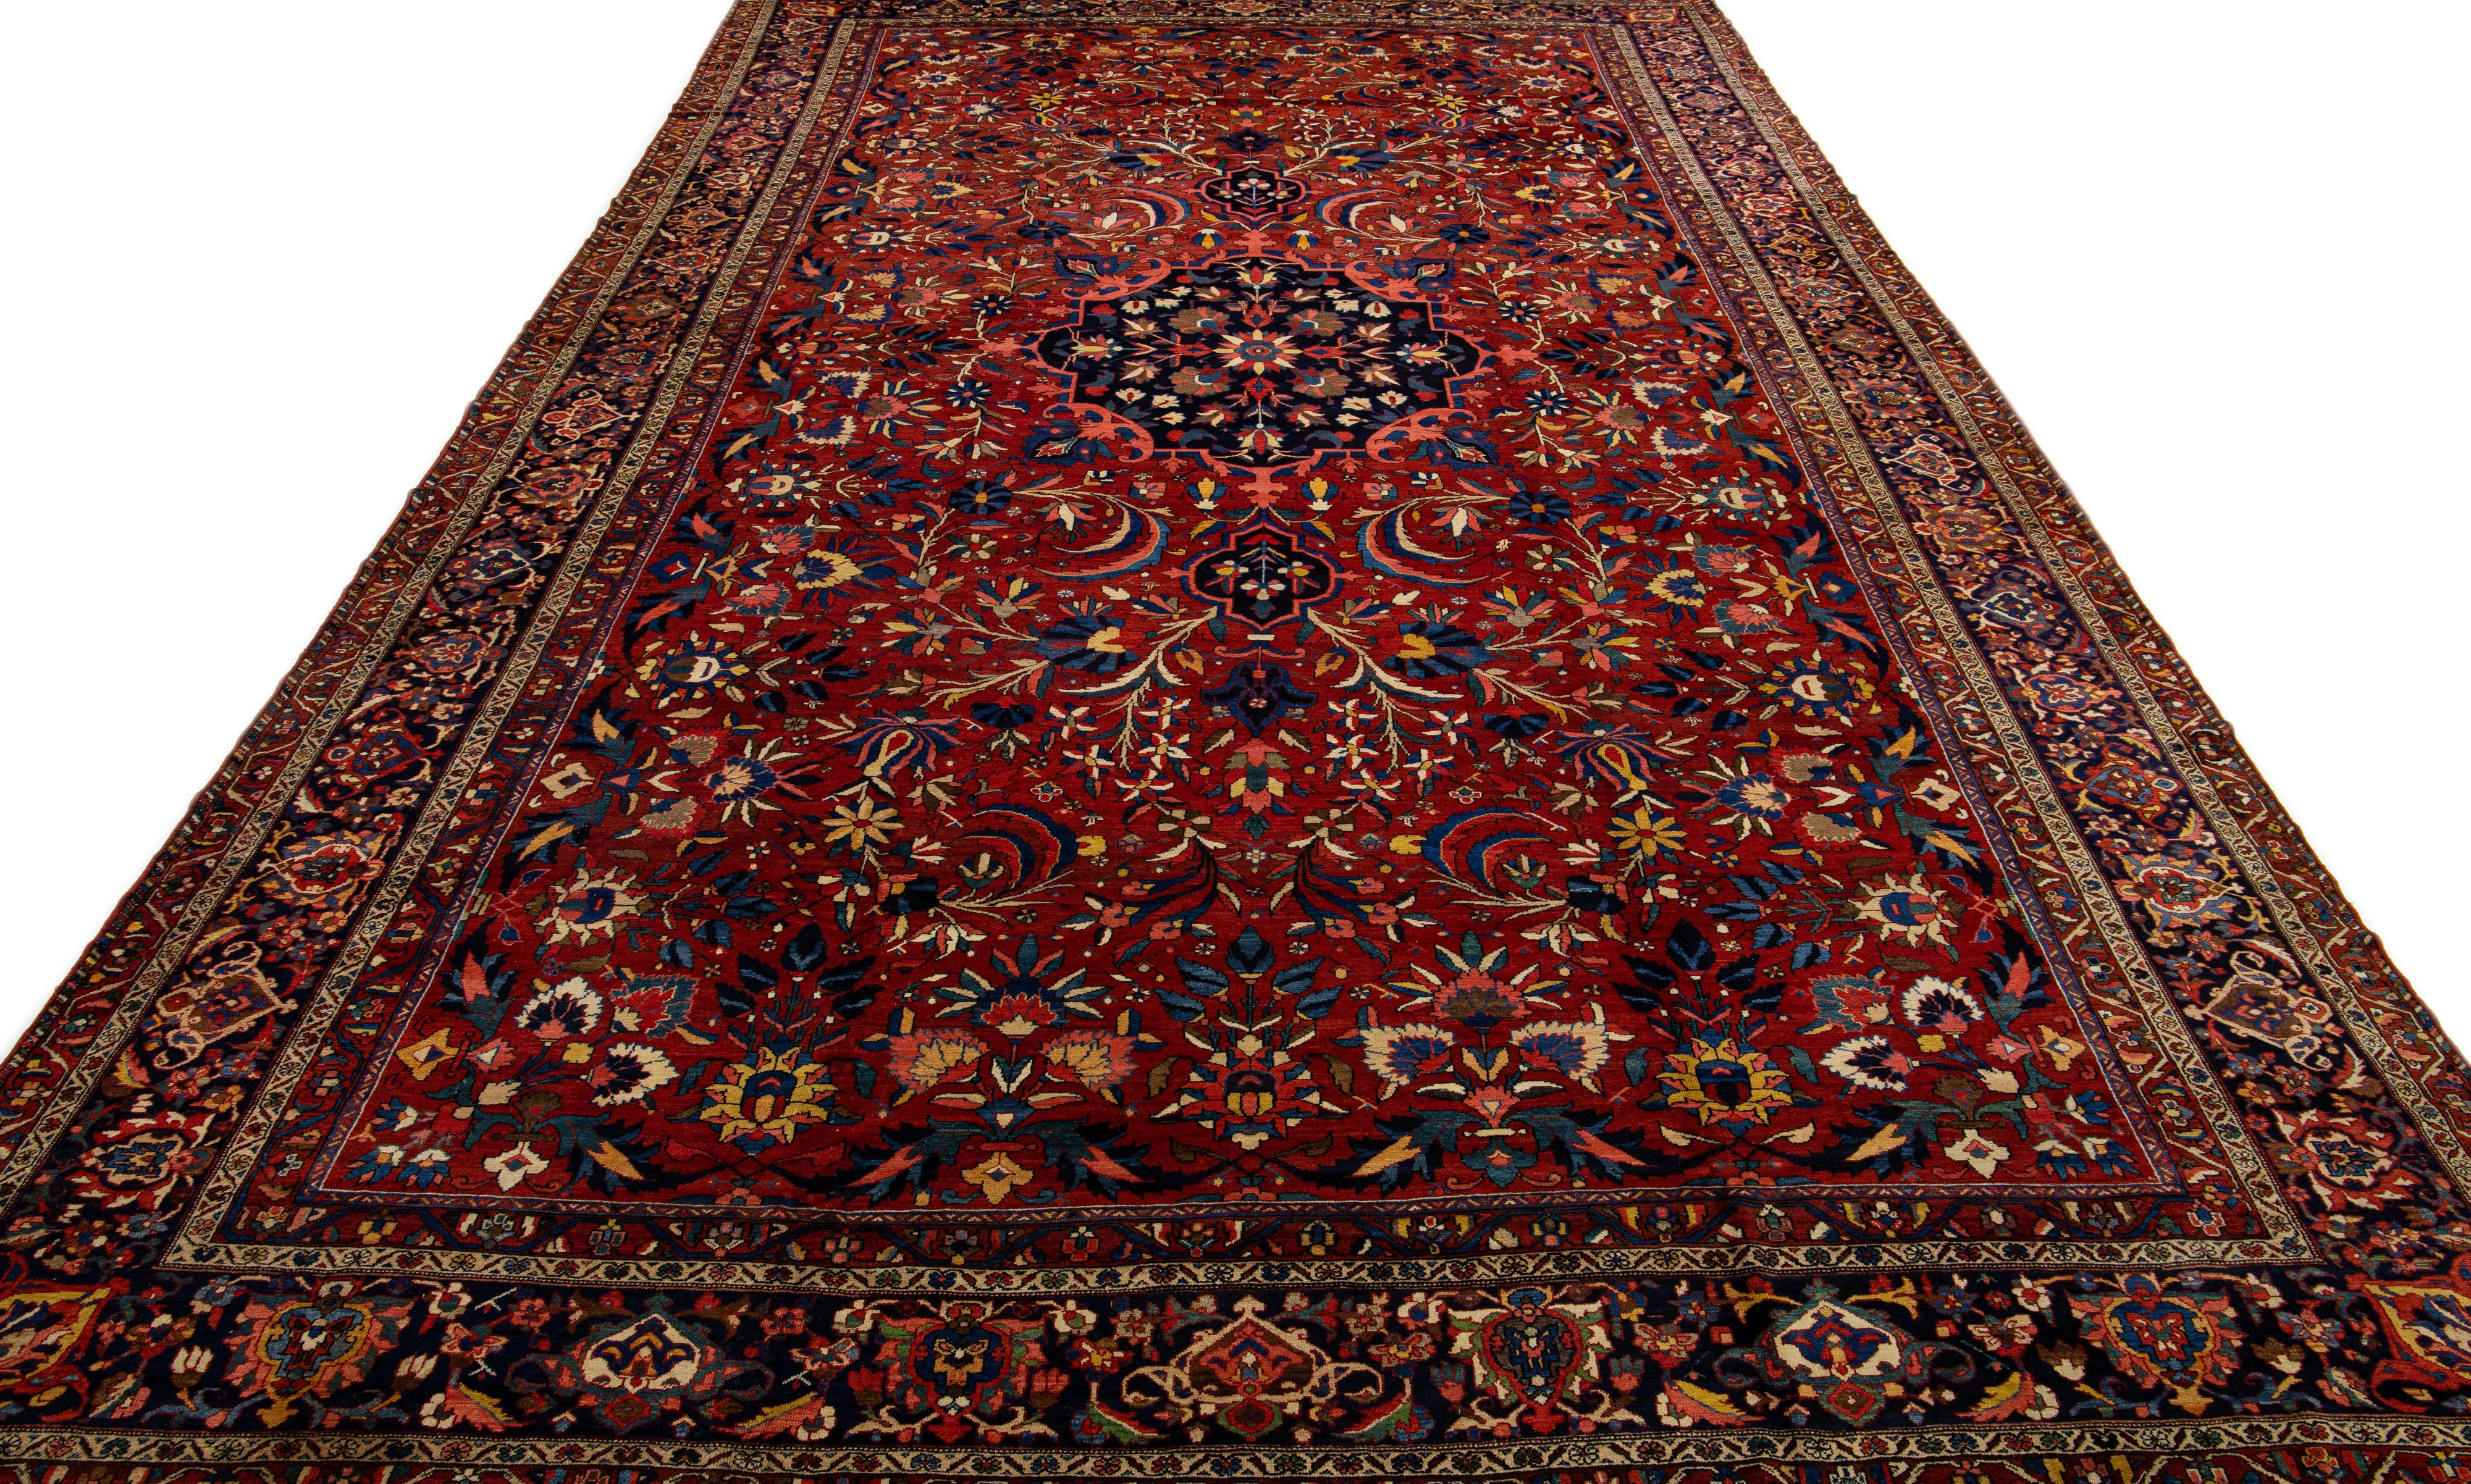 Crafted with precision and meticulous detail, this Bakhtiari hand-knotted wool rug showcases a Classic tribal design set against a red-colored field, highlighted by vibrant and colorful accents.

This rug measures 14'3